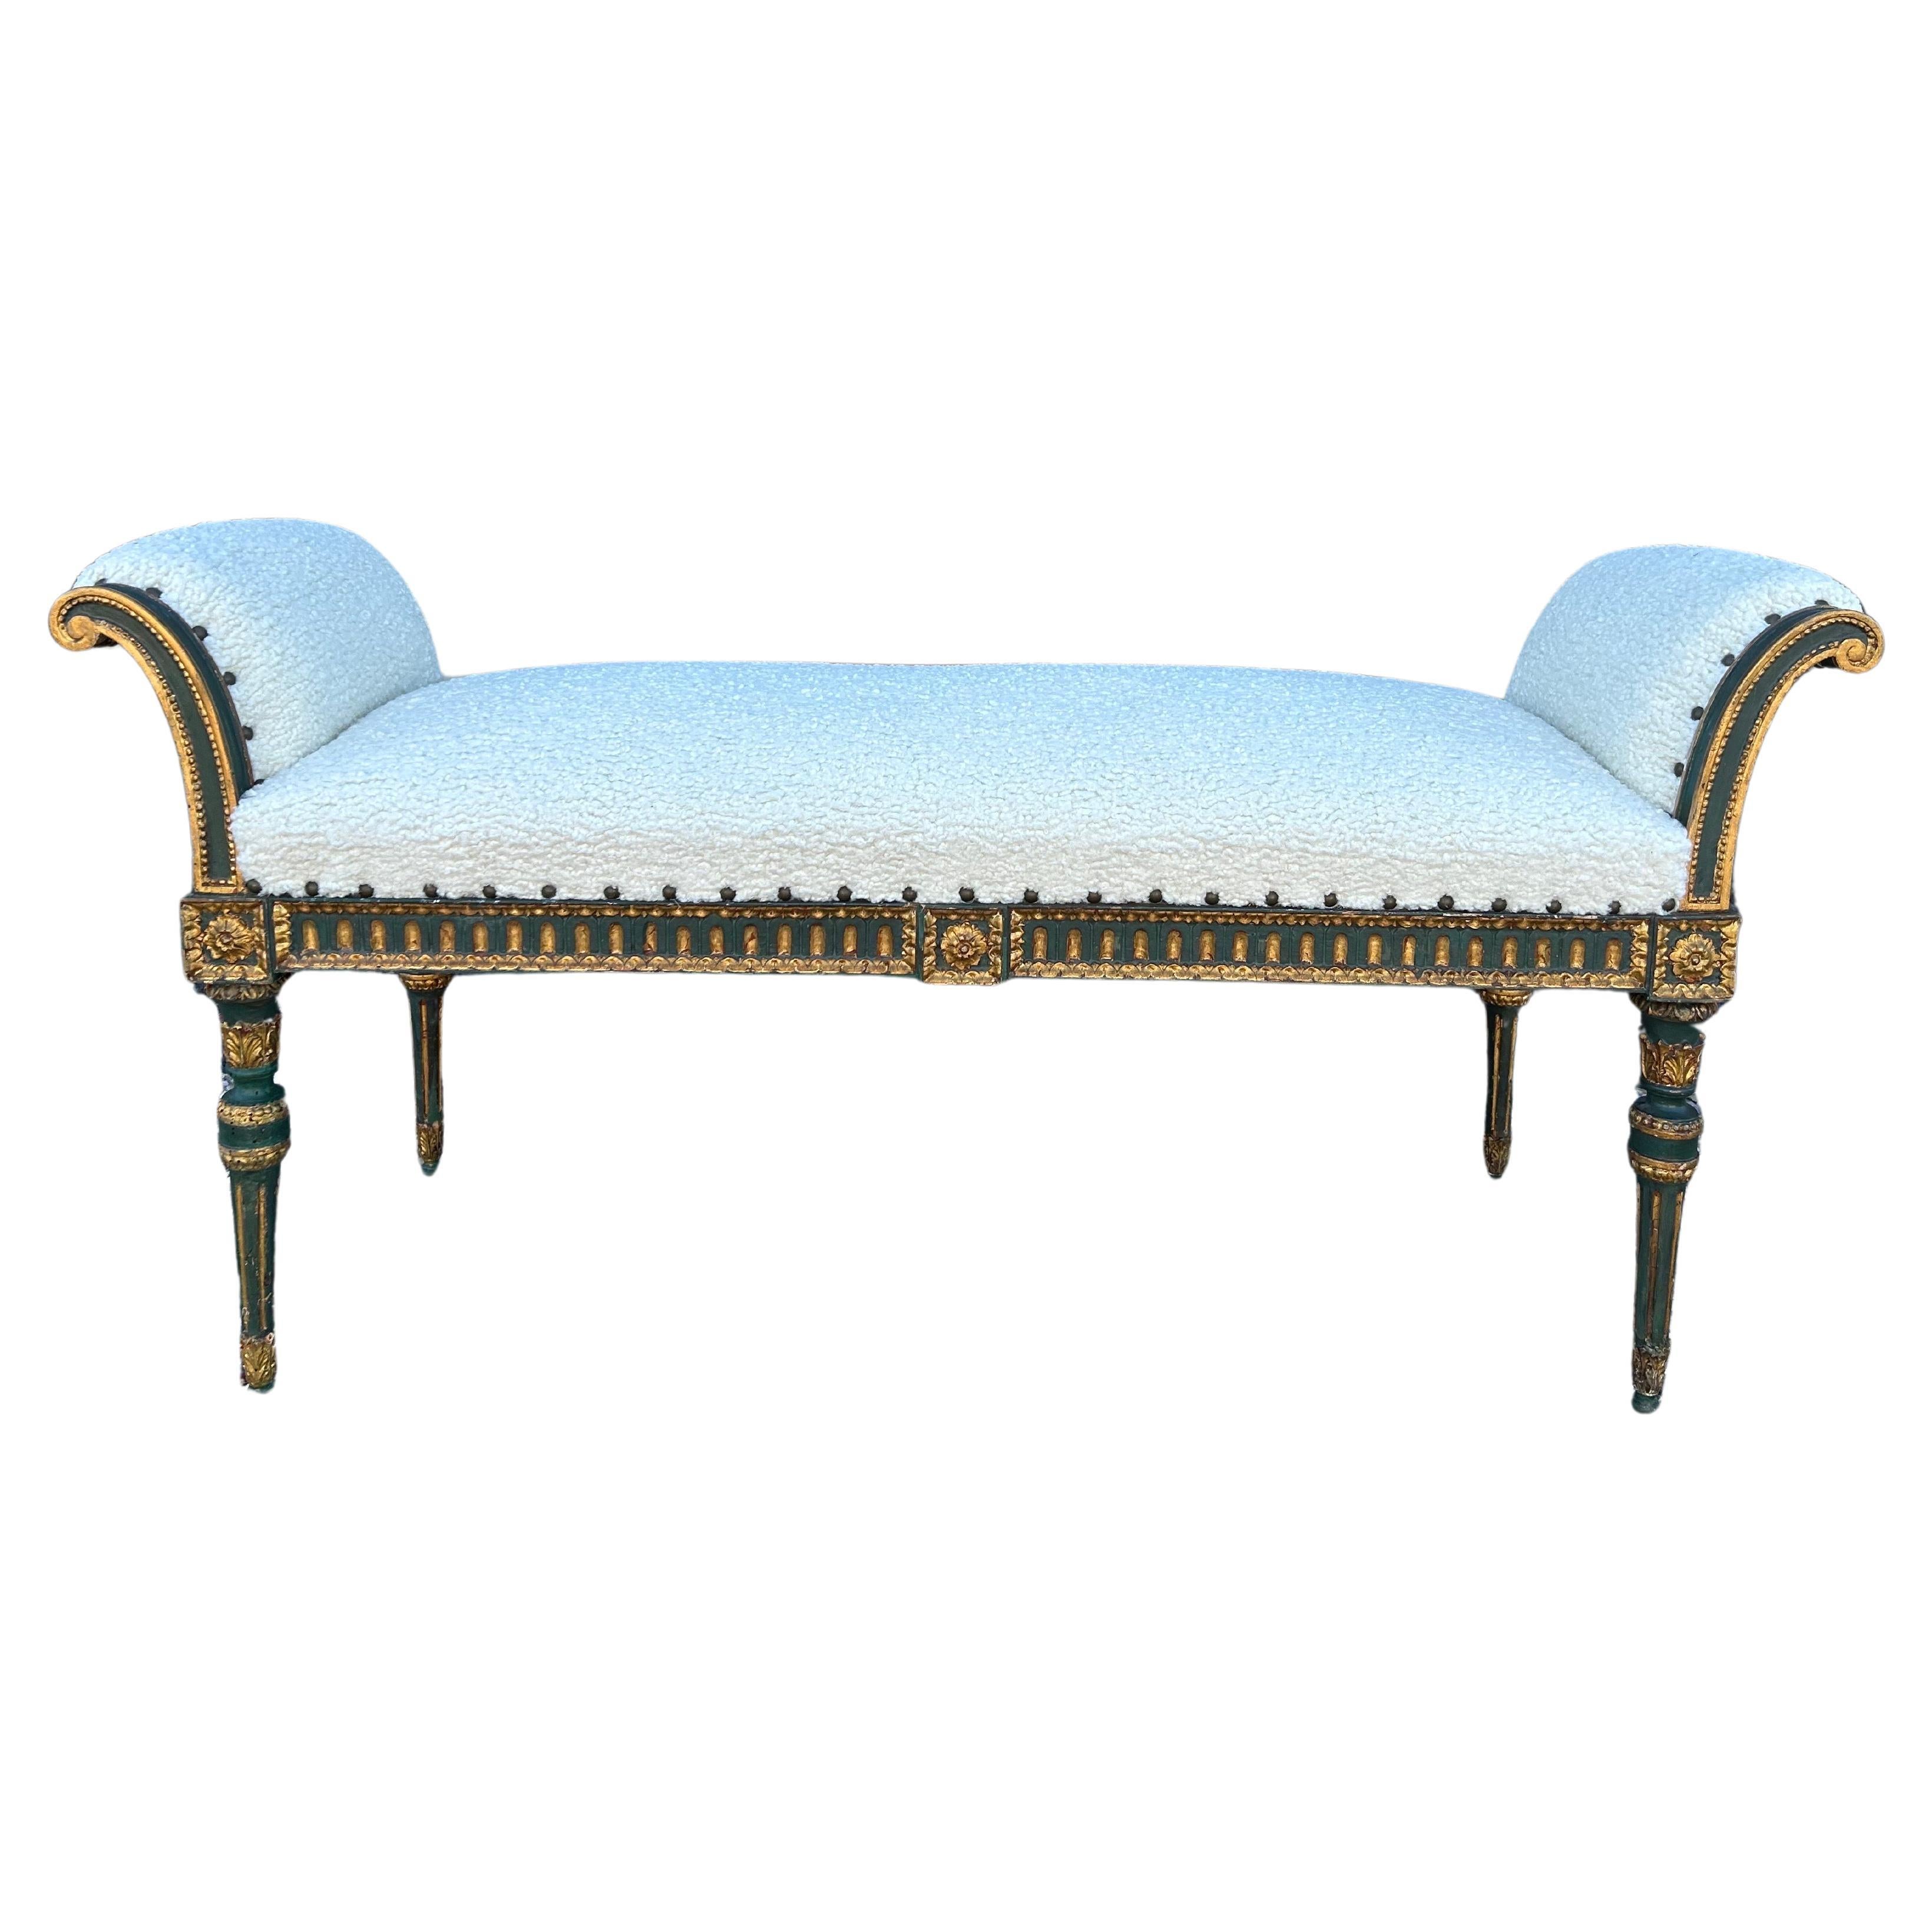 19th Century Italian Painted And Parcel Gilt Bench For Sale